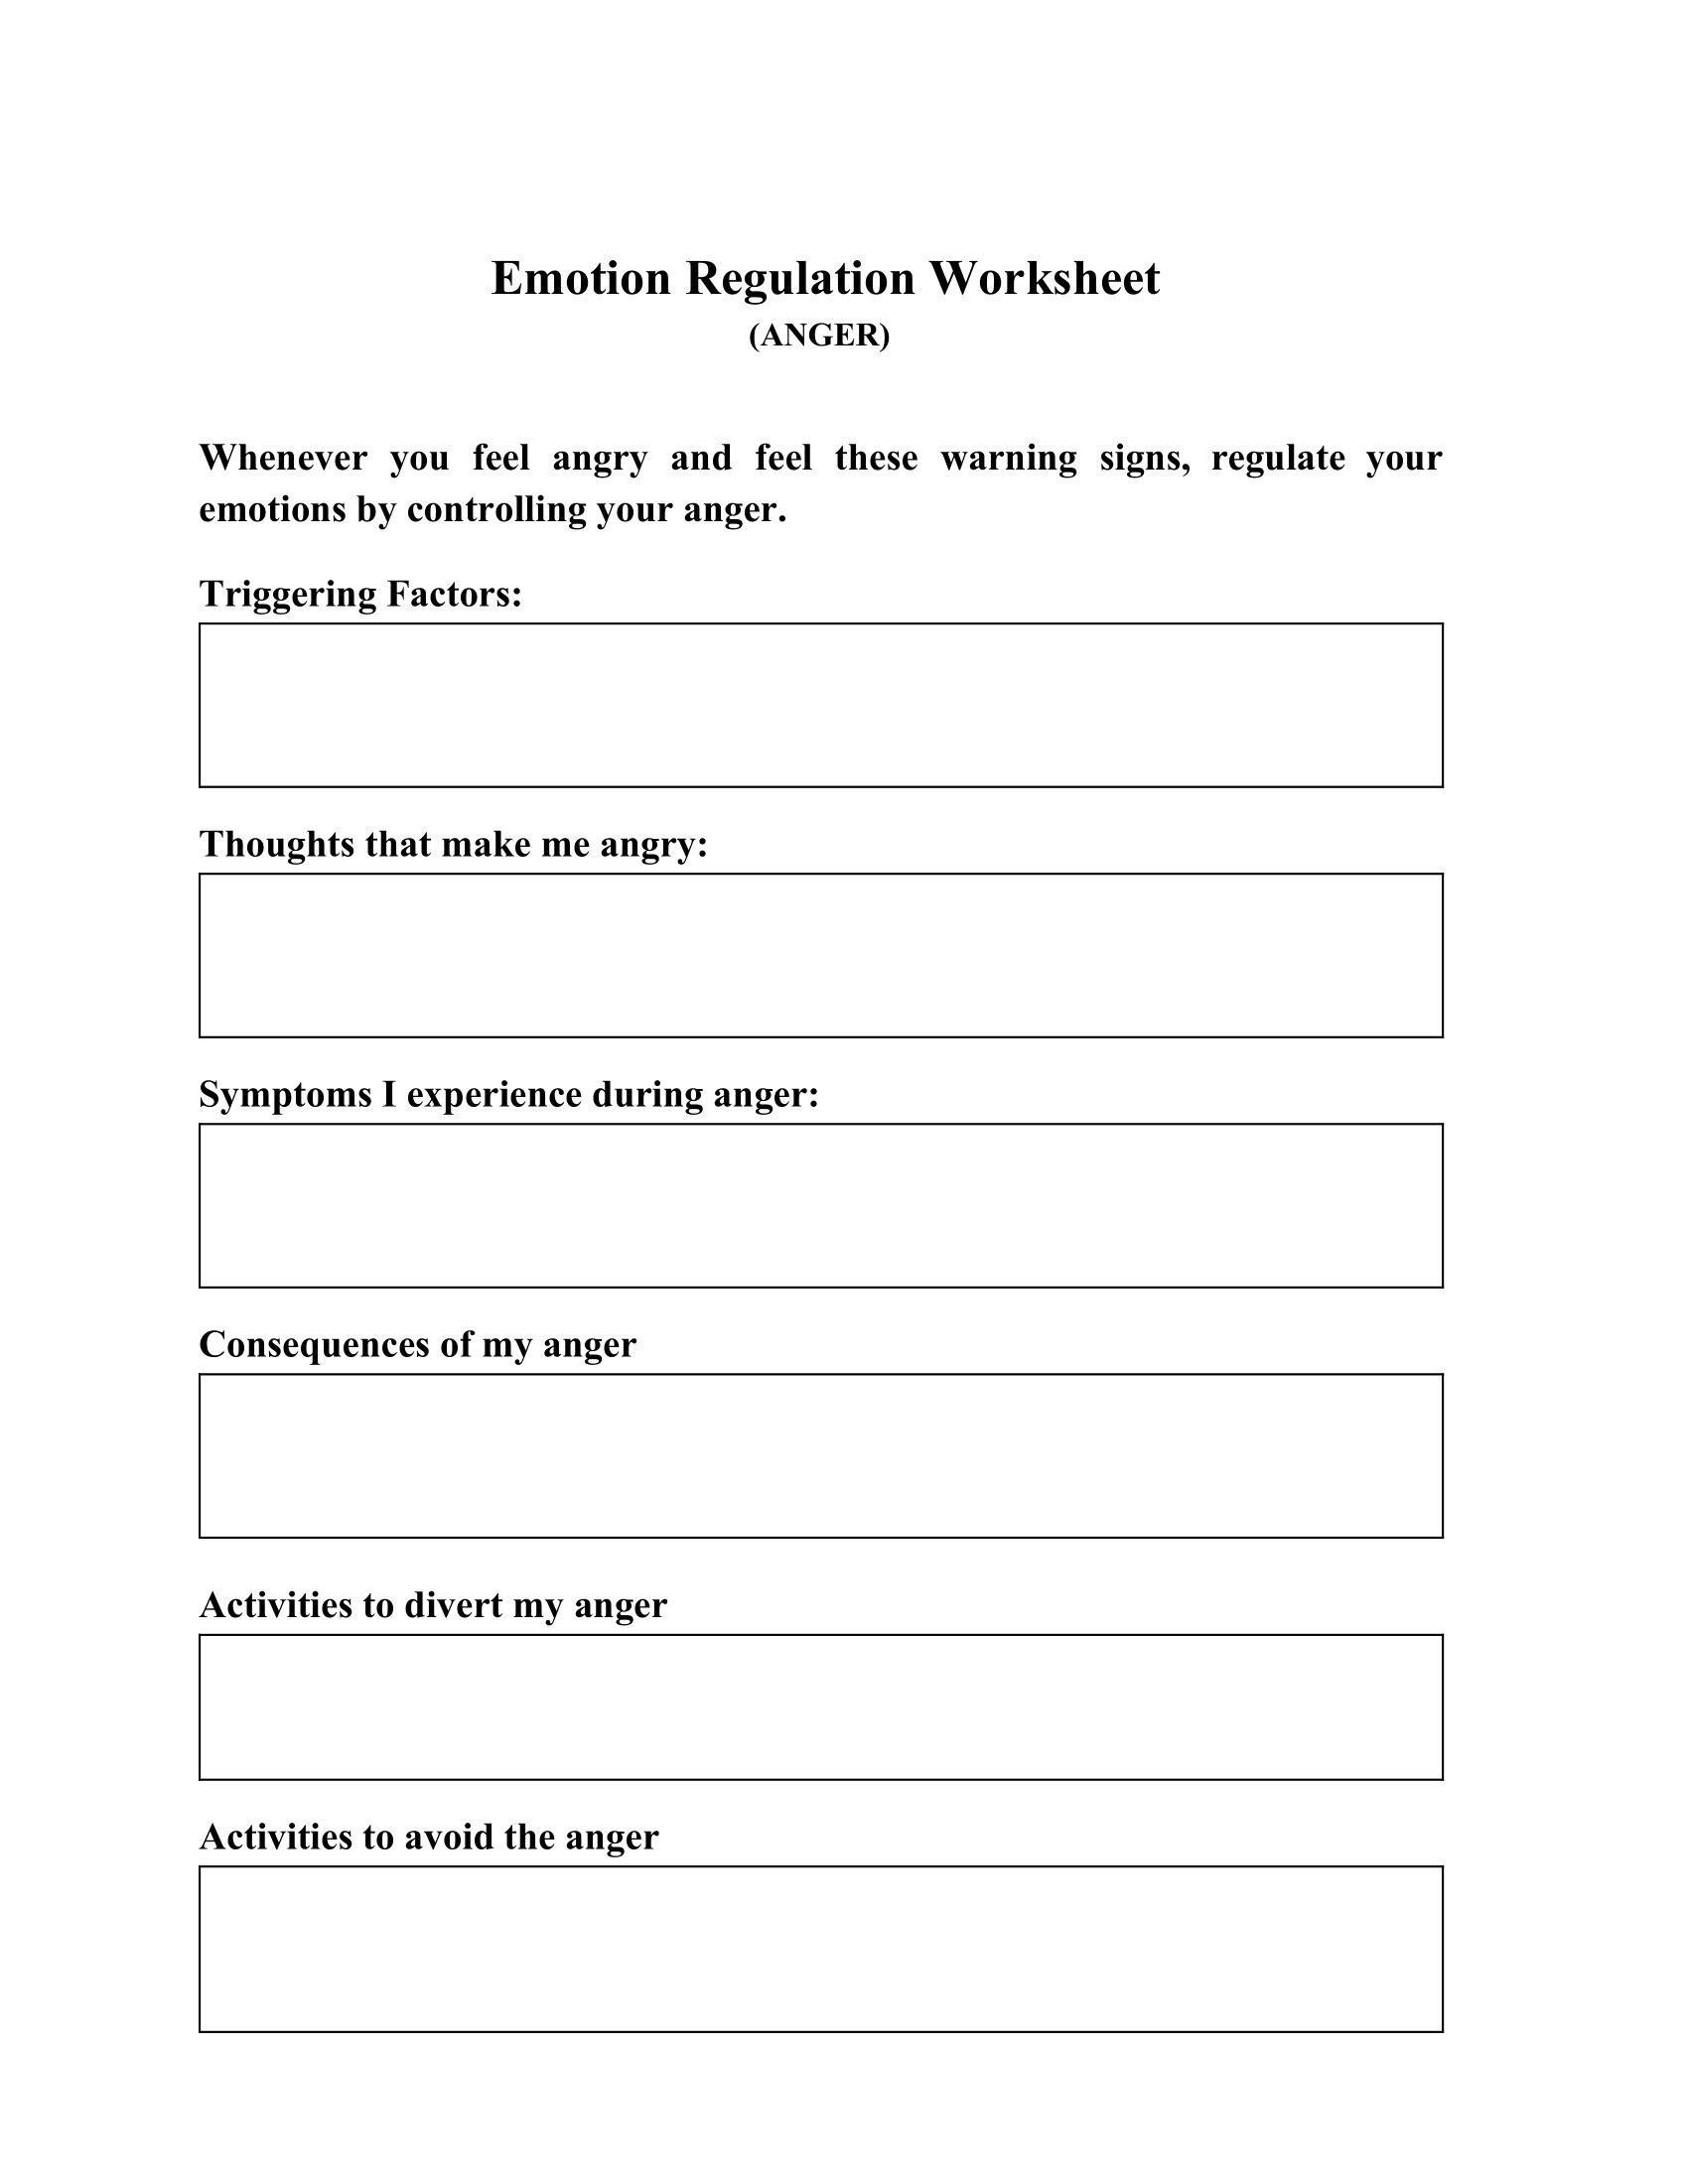 Emotional Regulation Therapy Worksheets